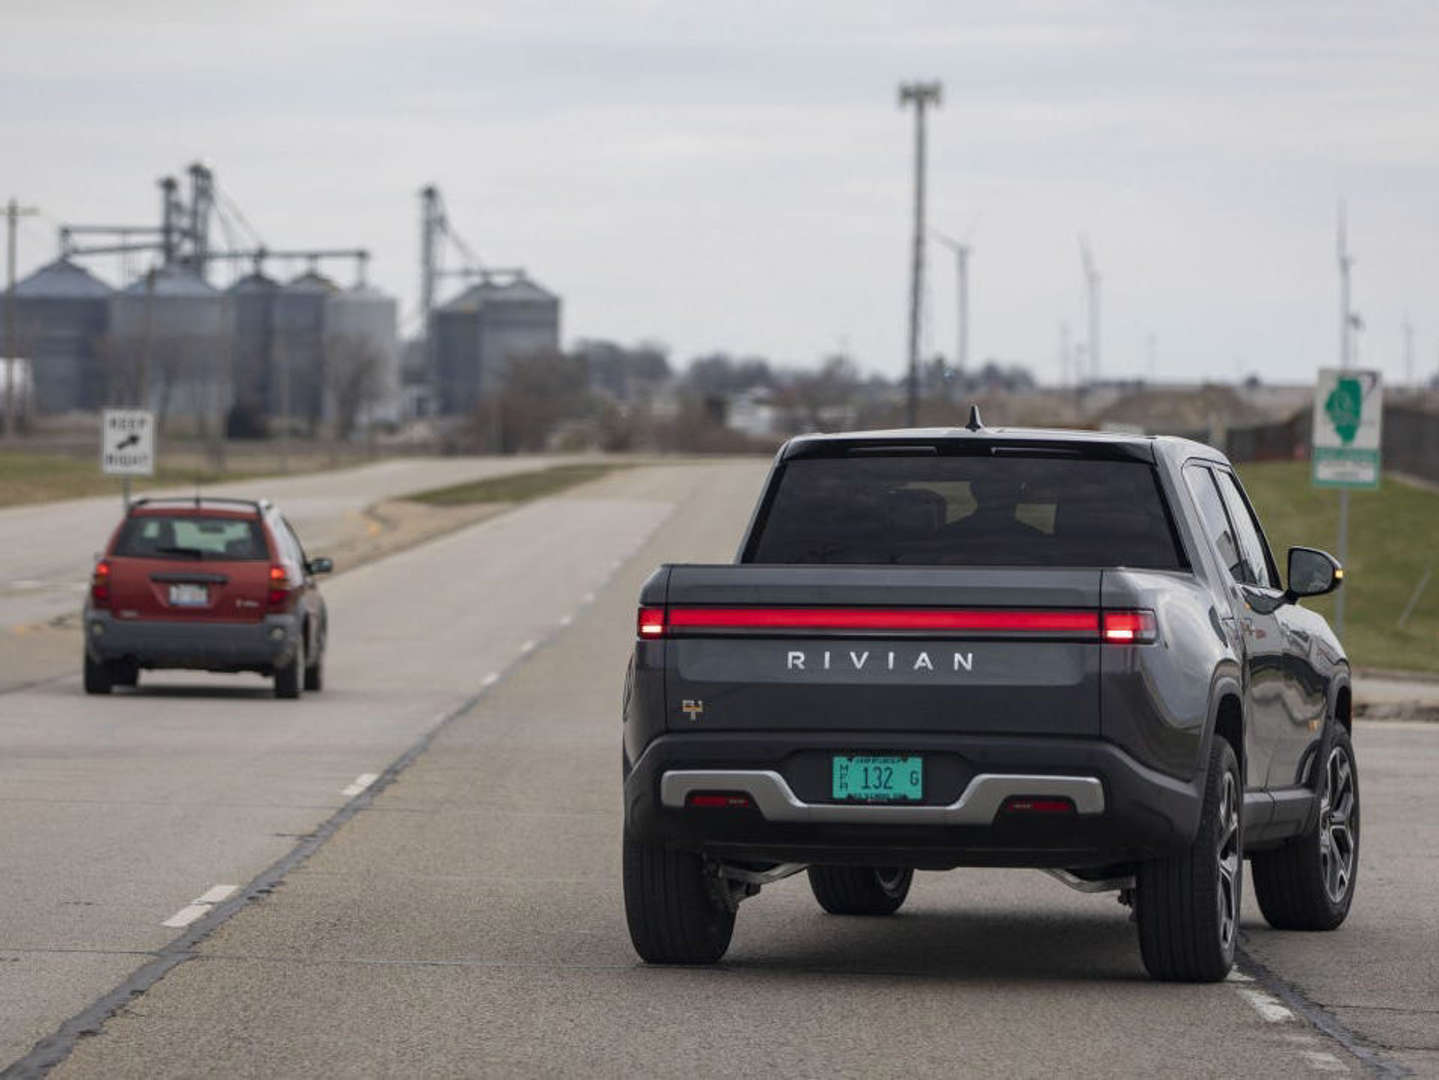 One Rivian owner said he got a repair bill for $42,000 after a fender bender, according to a report from The New York Times.